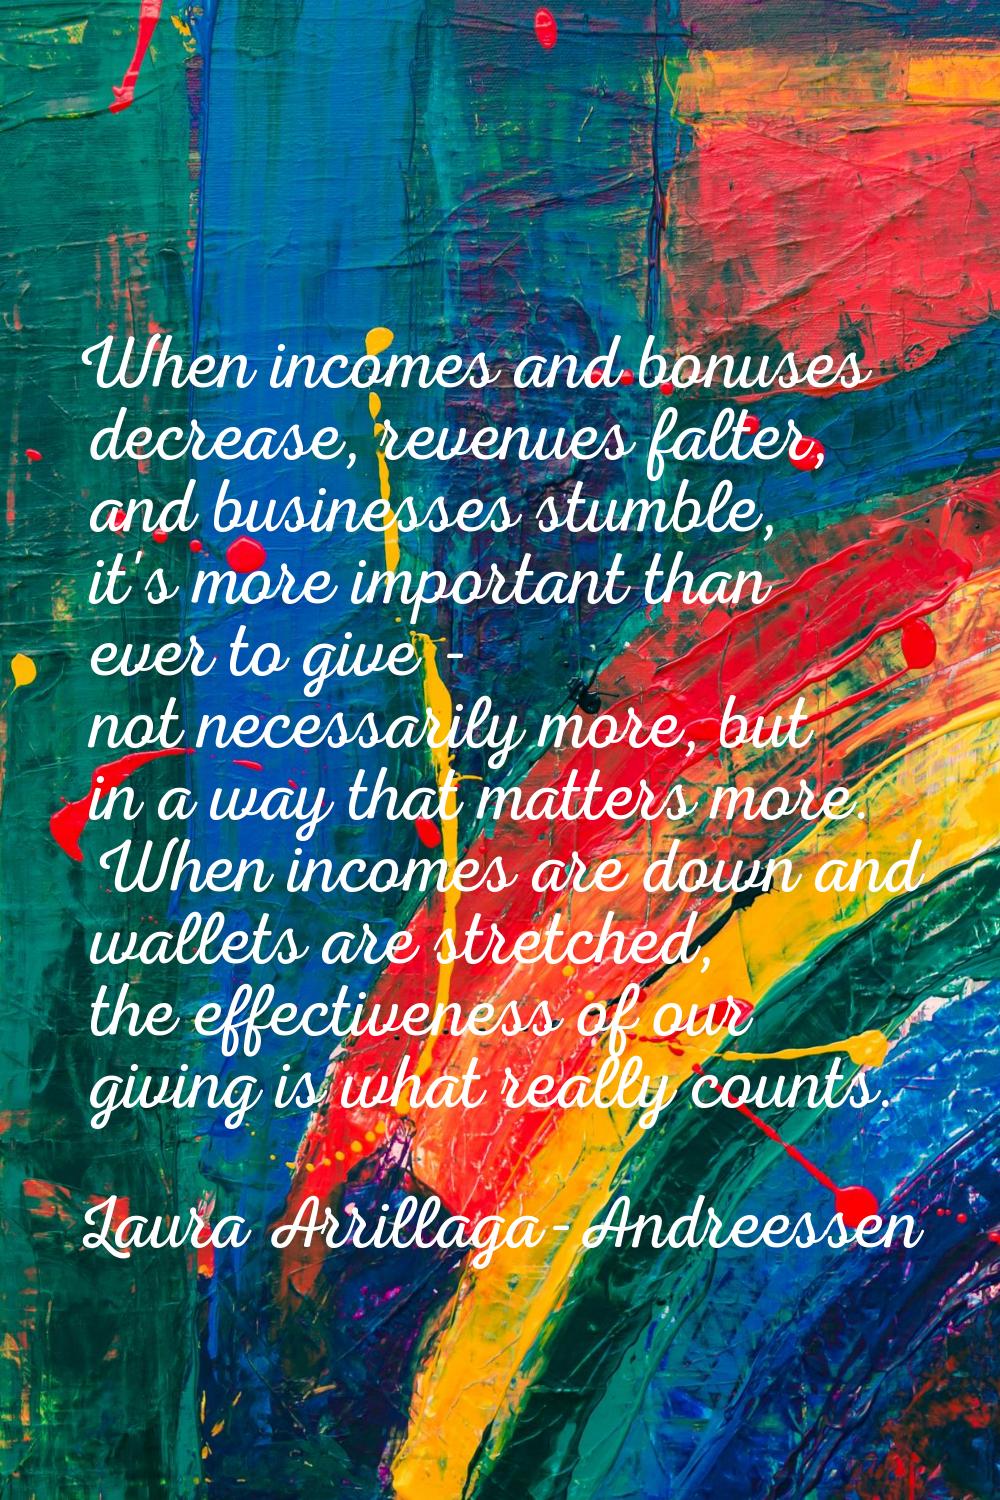 When incomes and bonuses decrease, revenues falter, and businesses stumble, it's more important tha